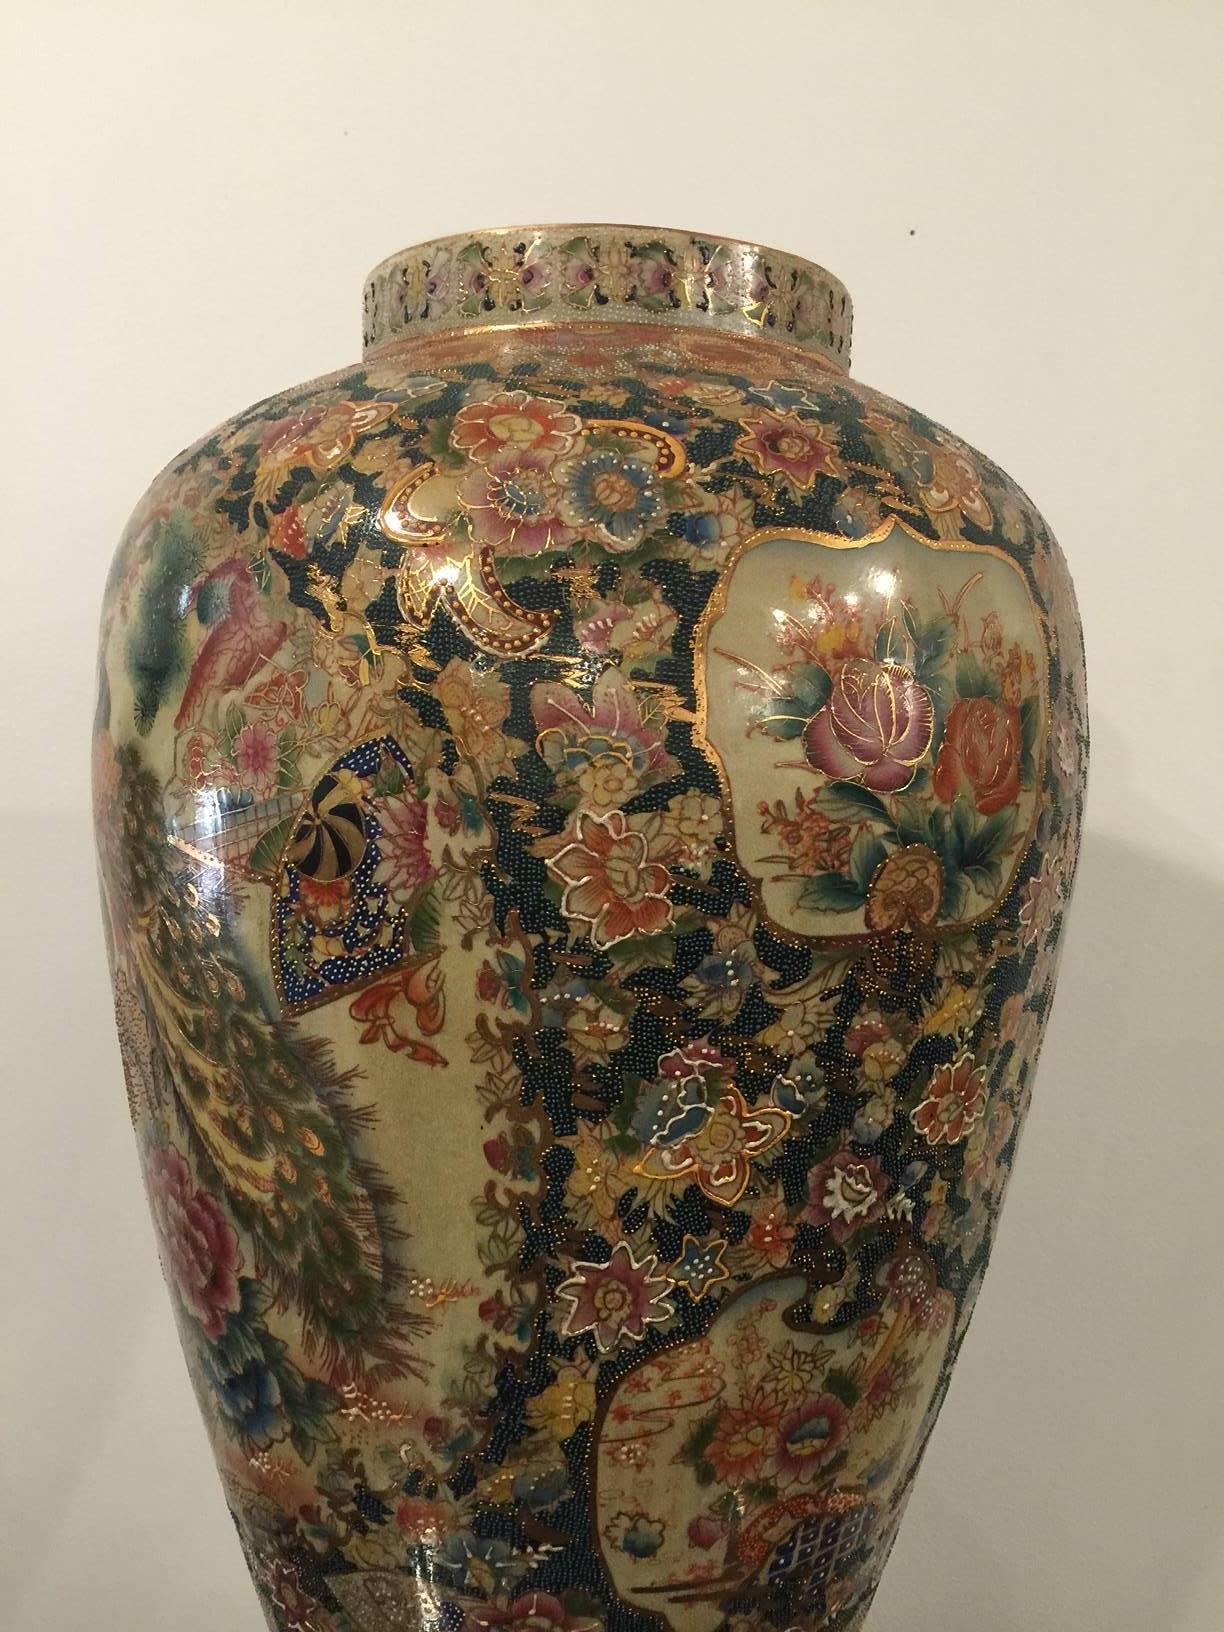 Exceptional detail on this huge palace floor jar.  This piece consists of base, jar, and lid for a total height of 51